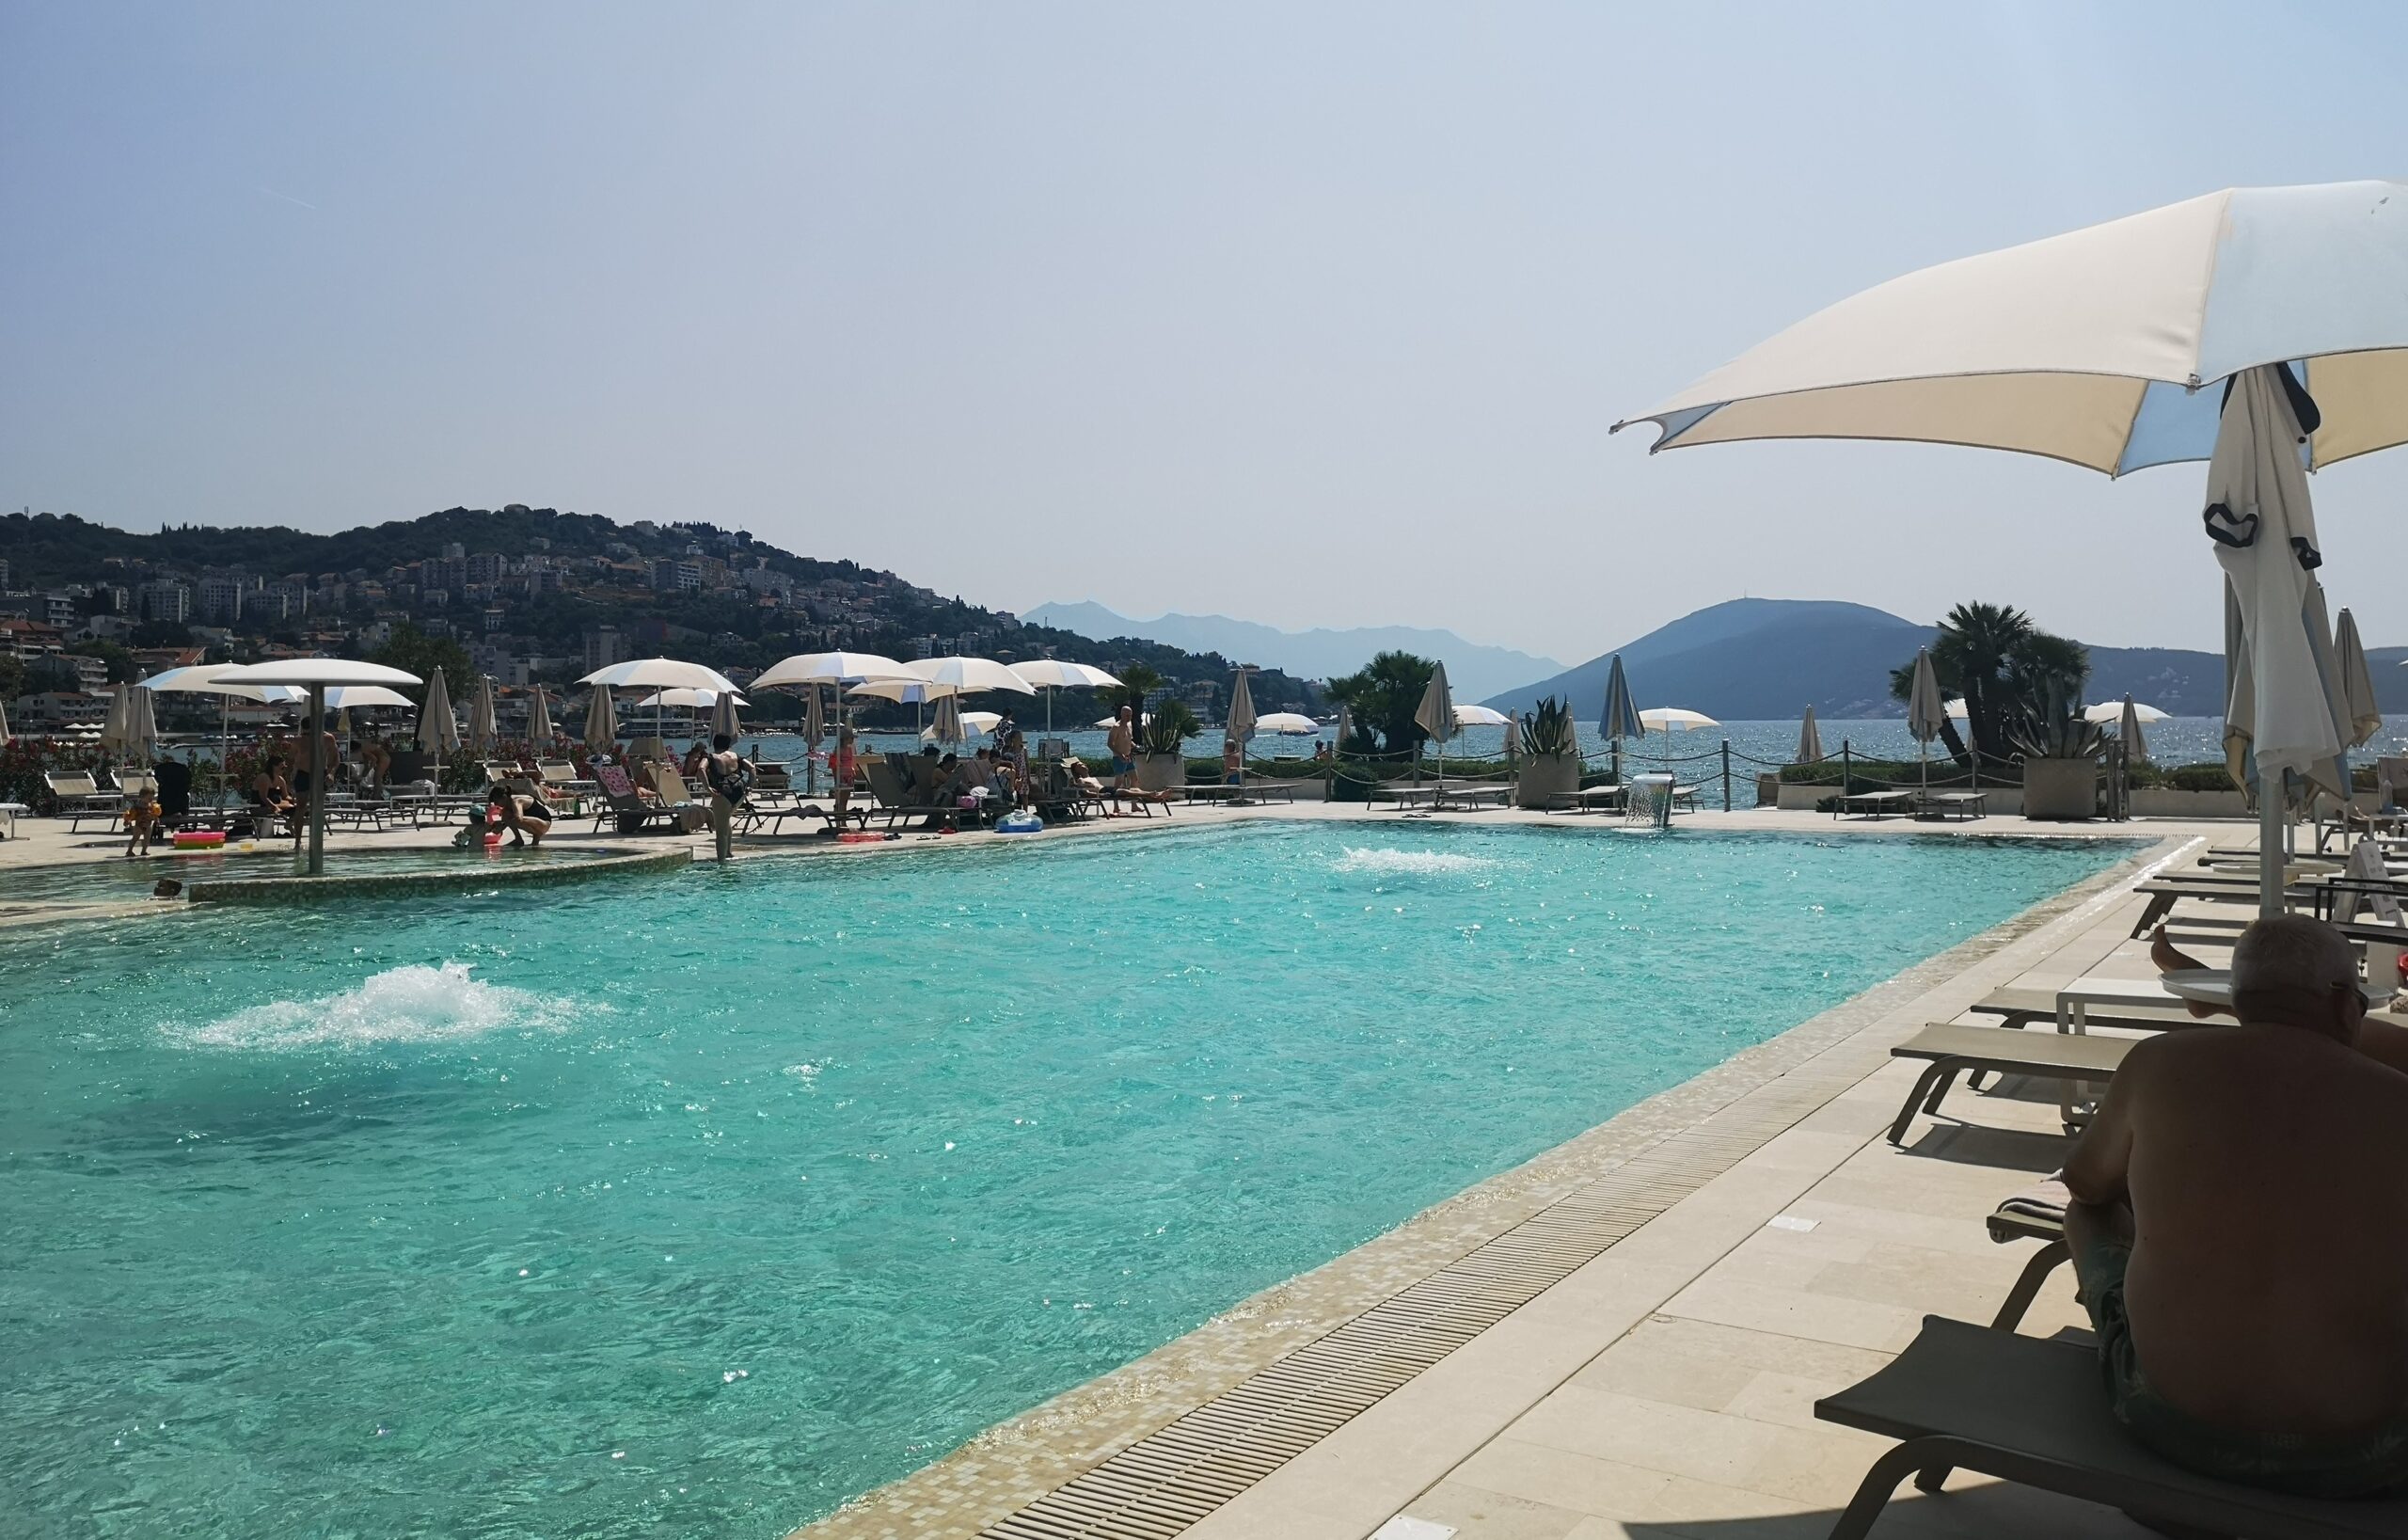 The Palmon Bay Hotel's Beach Club pool, outside area and the mountain scenery.